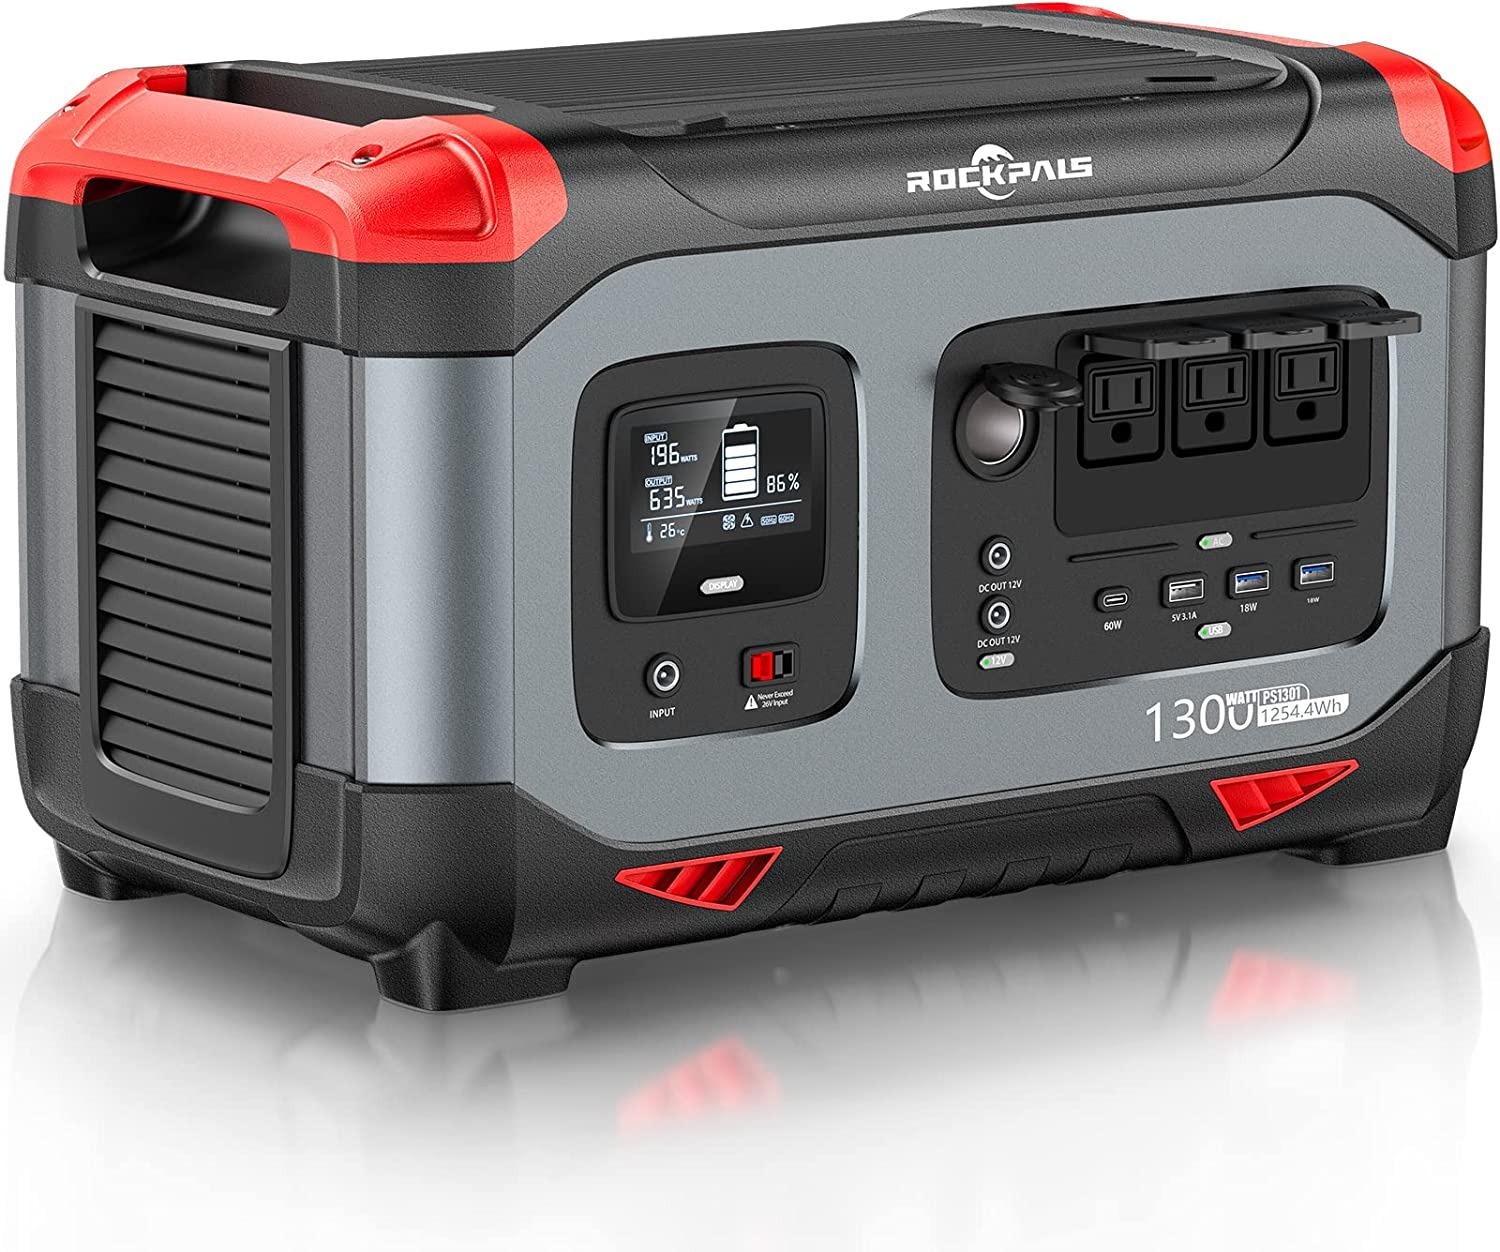 ROCKPALS 1300W/1254Wh LiFePO4 Portable Power Station $560 + Free Shipping